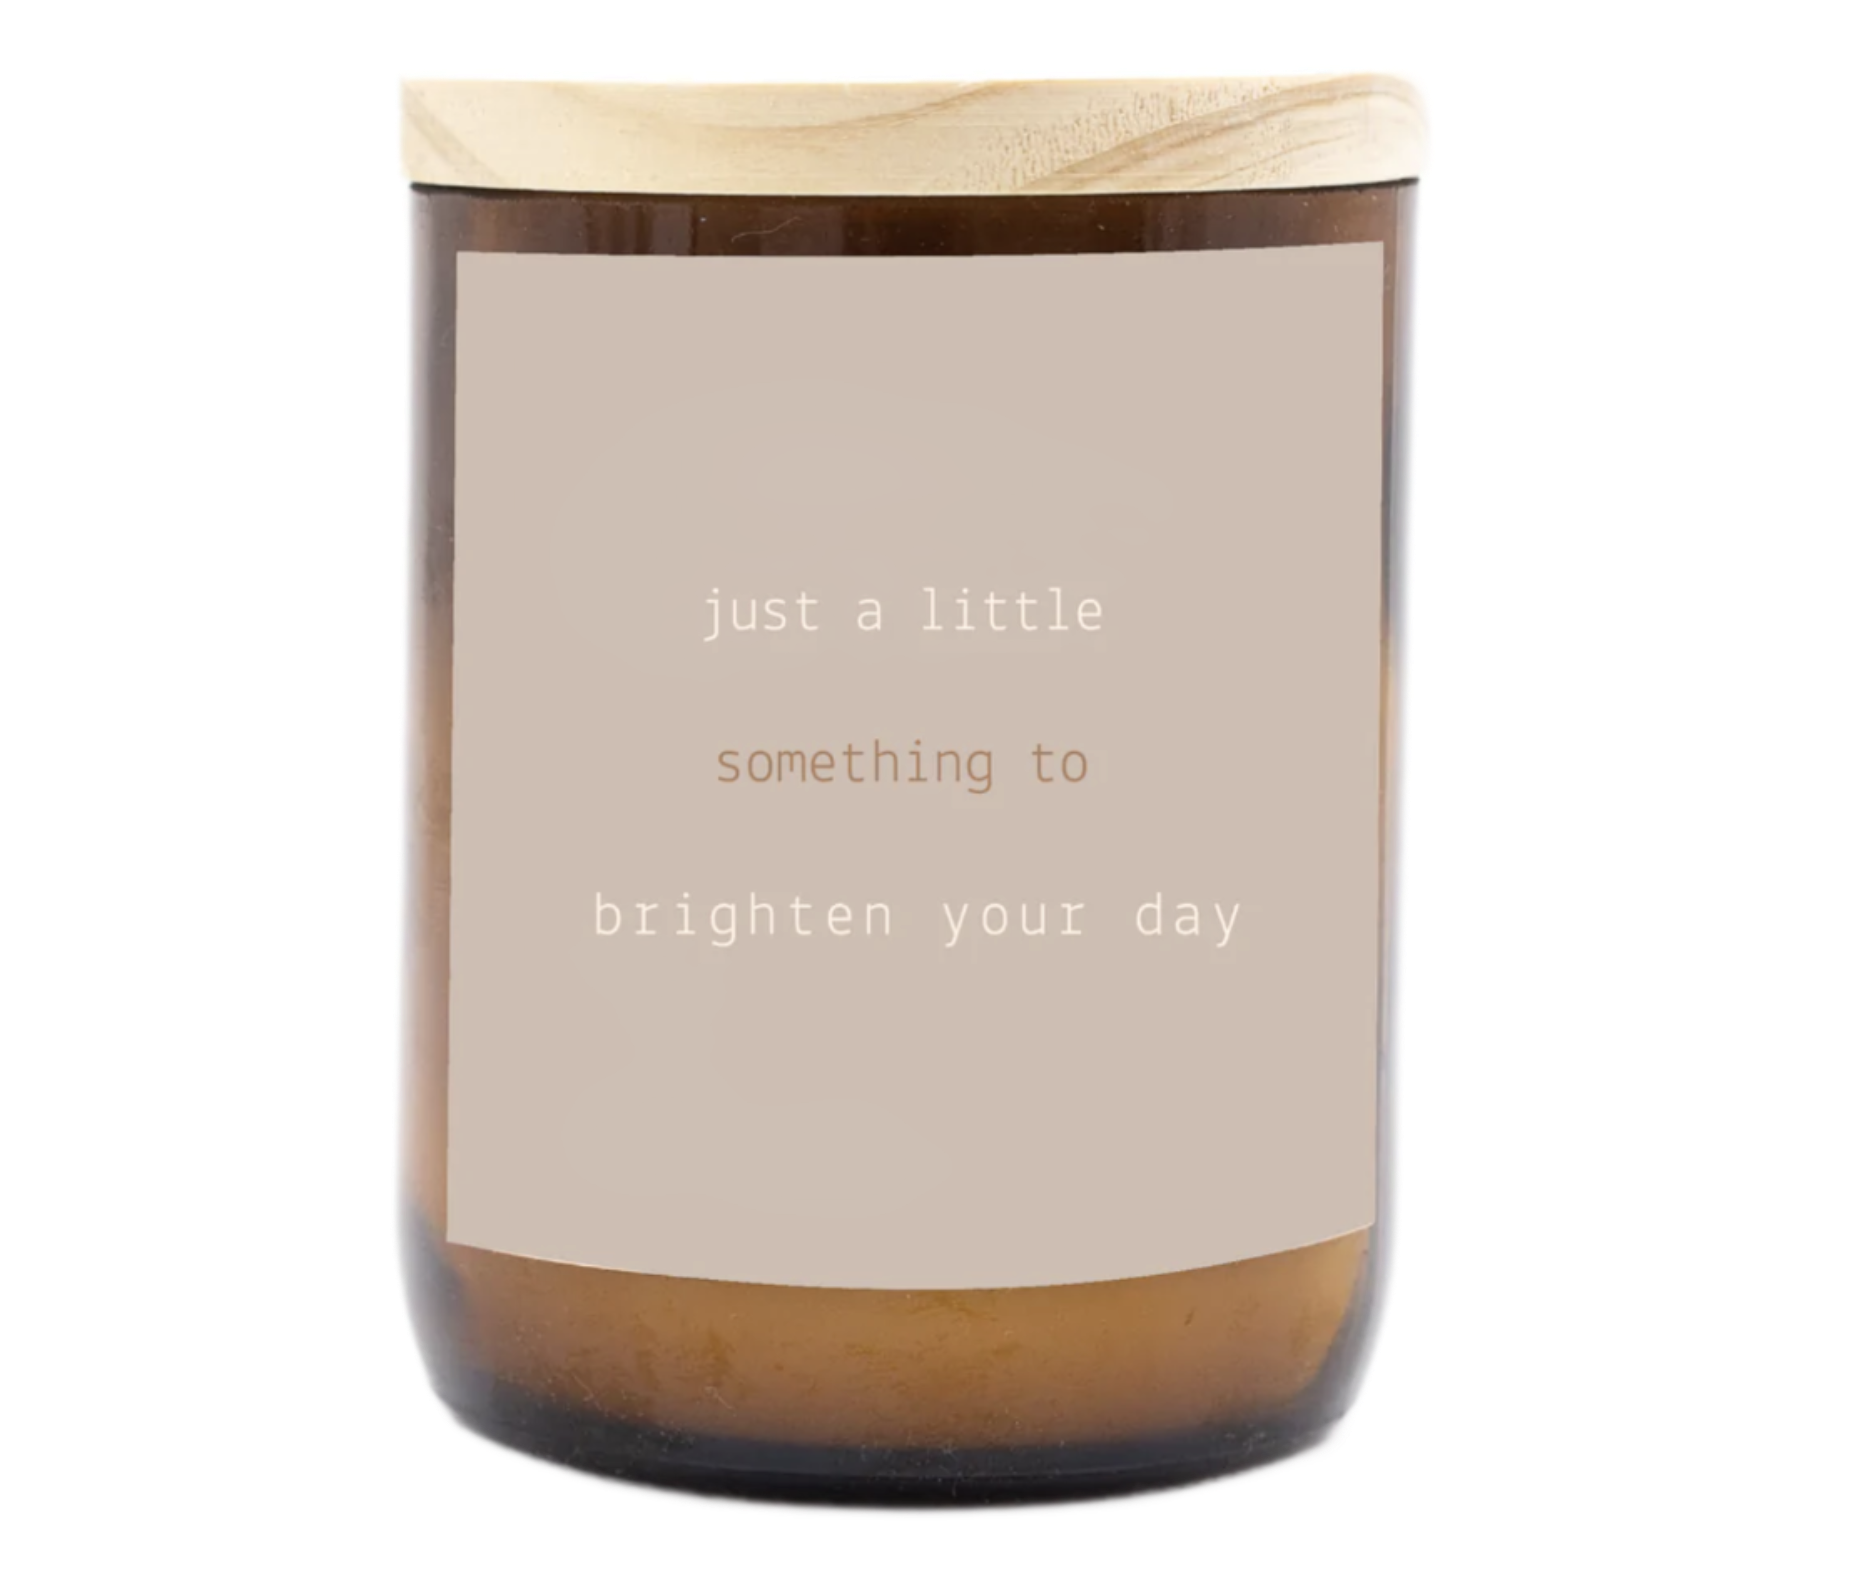 Commonfolk Candle - Happy Days Brighten Your Day